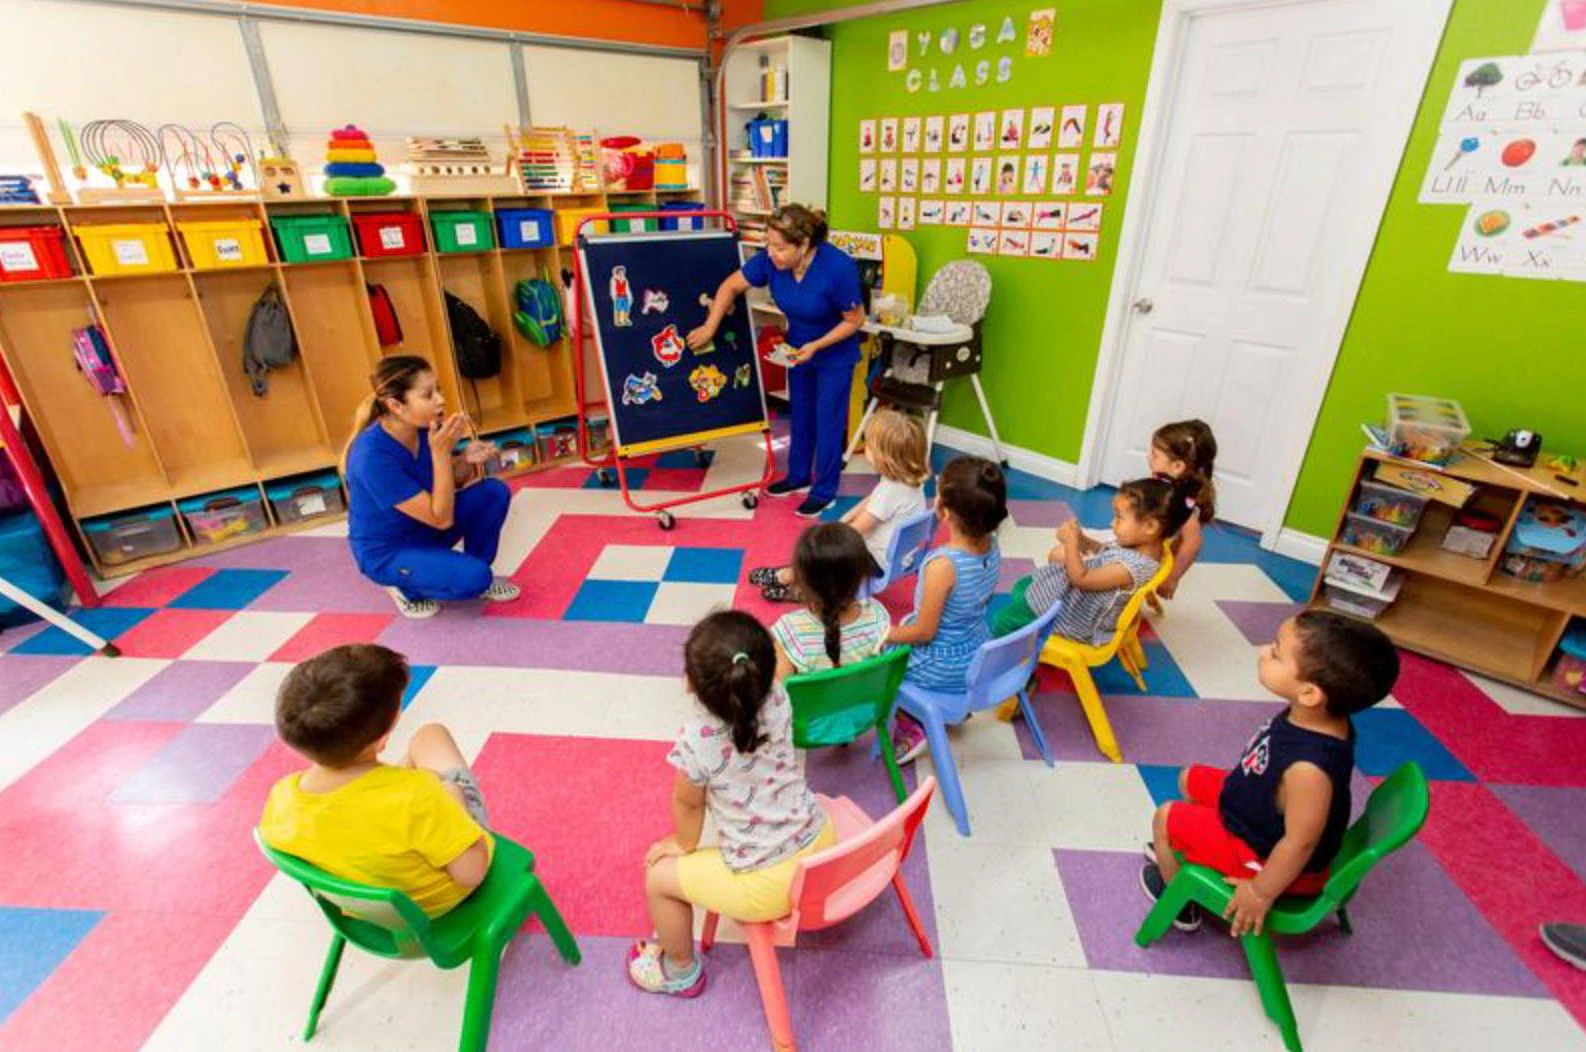 Upwards daycare providers instructing students in the classroom.